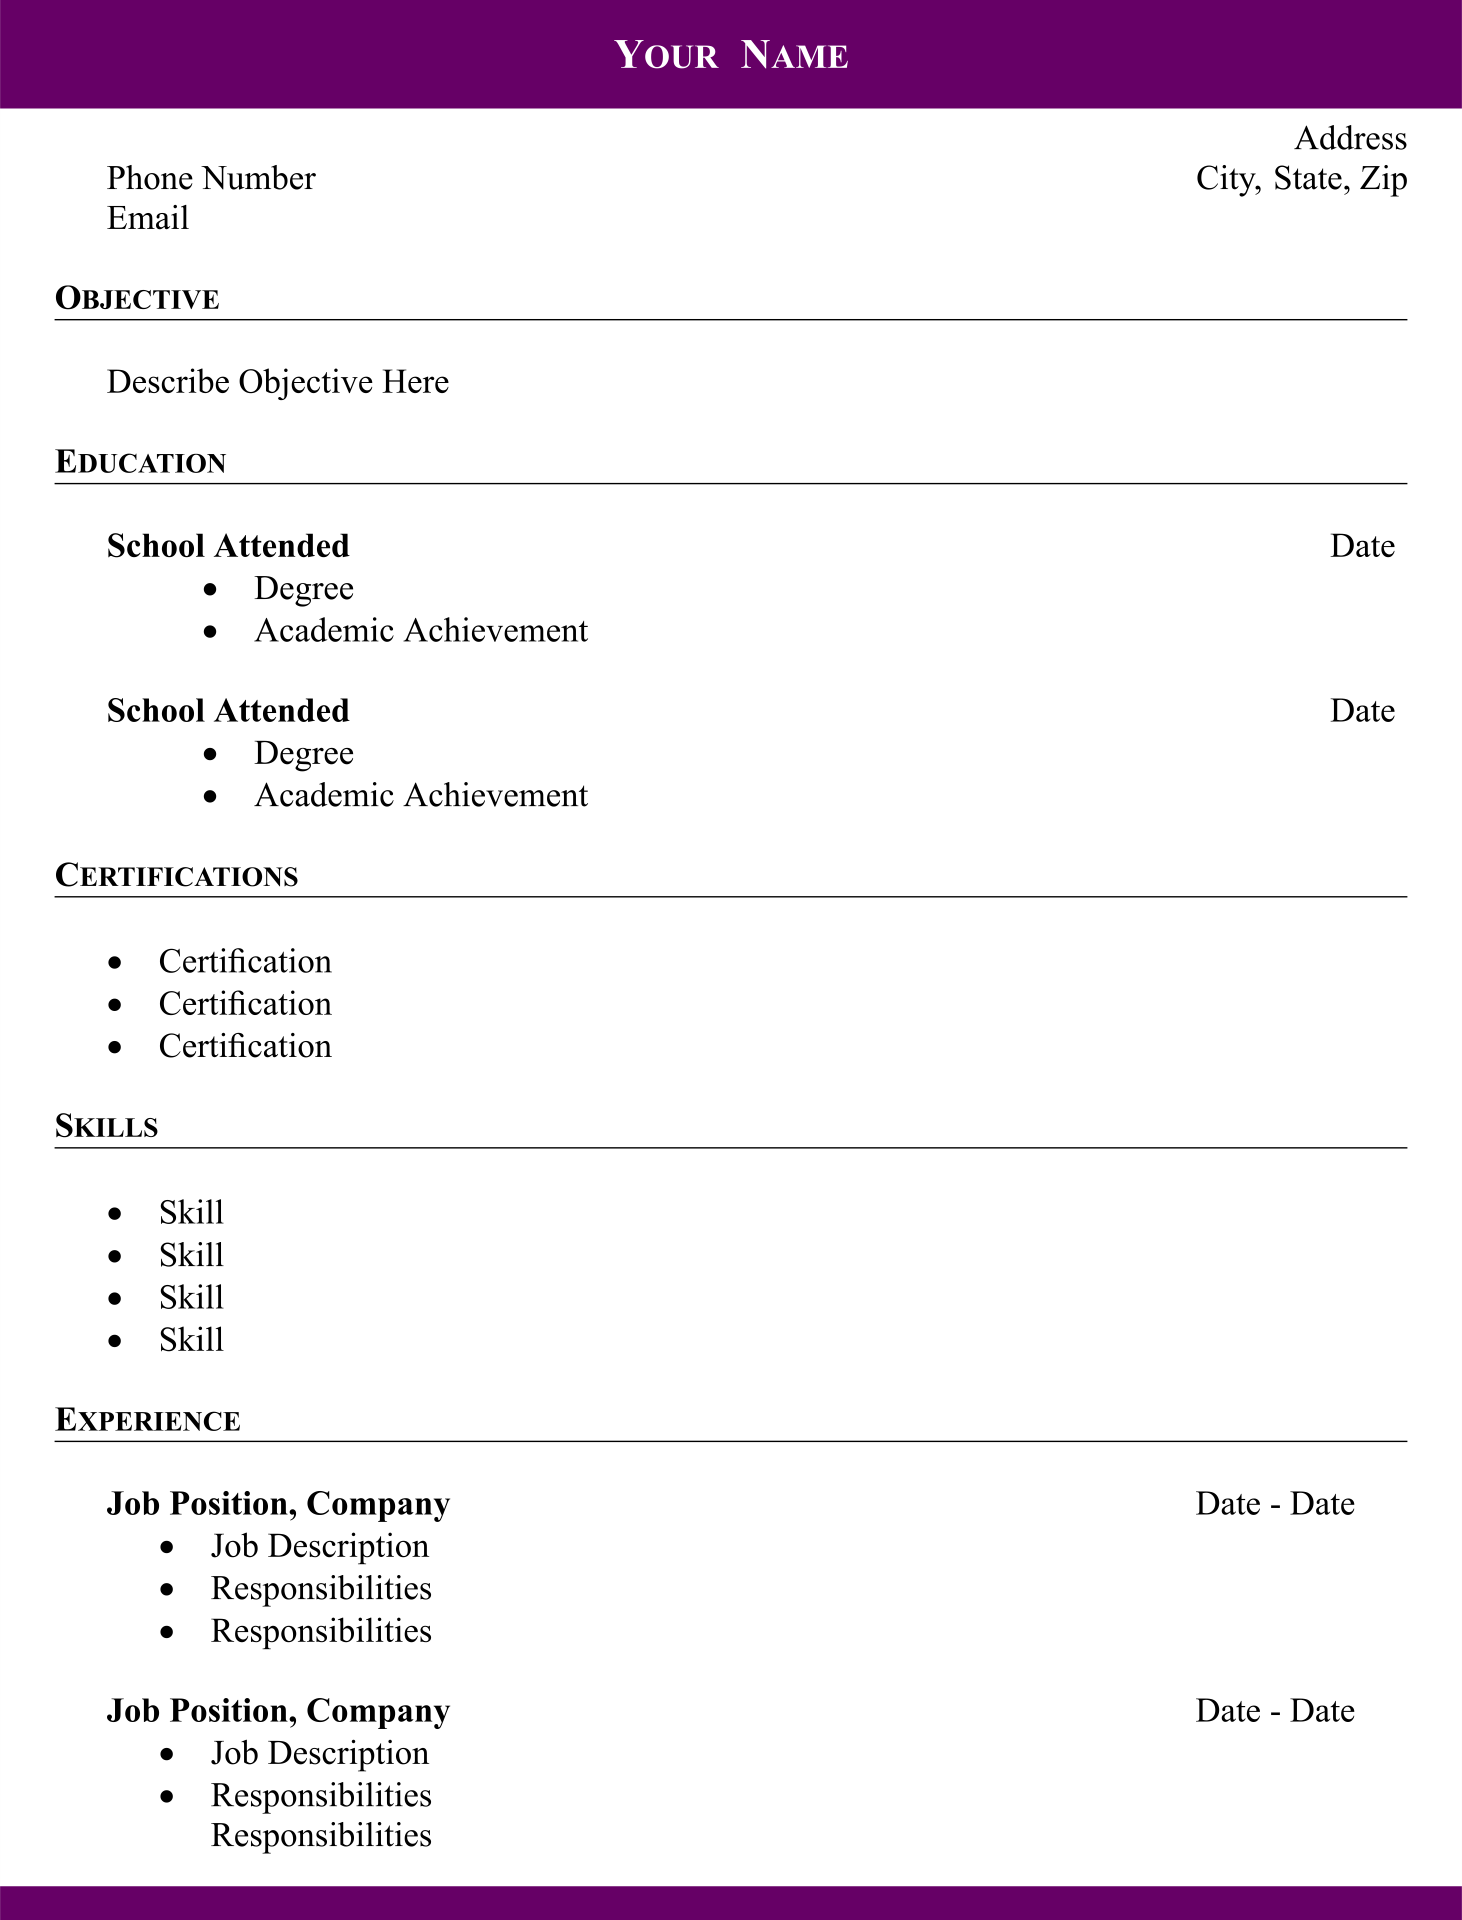 7-best-images-of-fill-in-blank-printable-resume-free-printable-resume-fill-in-blank-resume